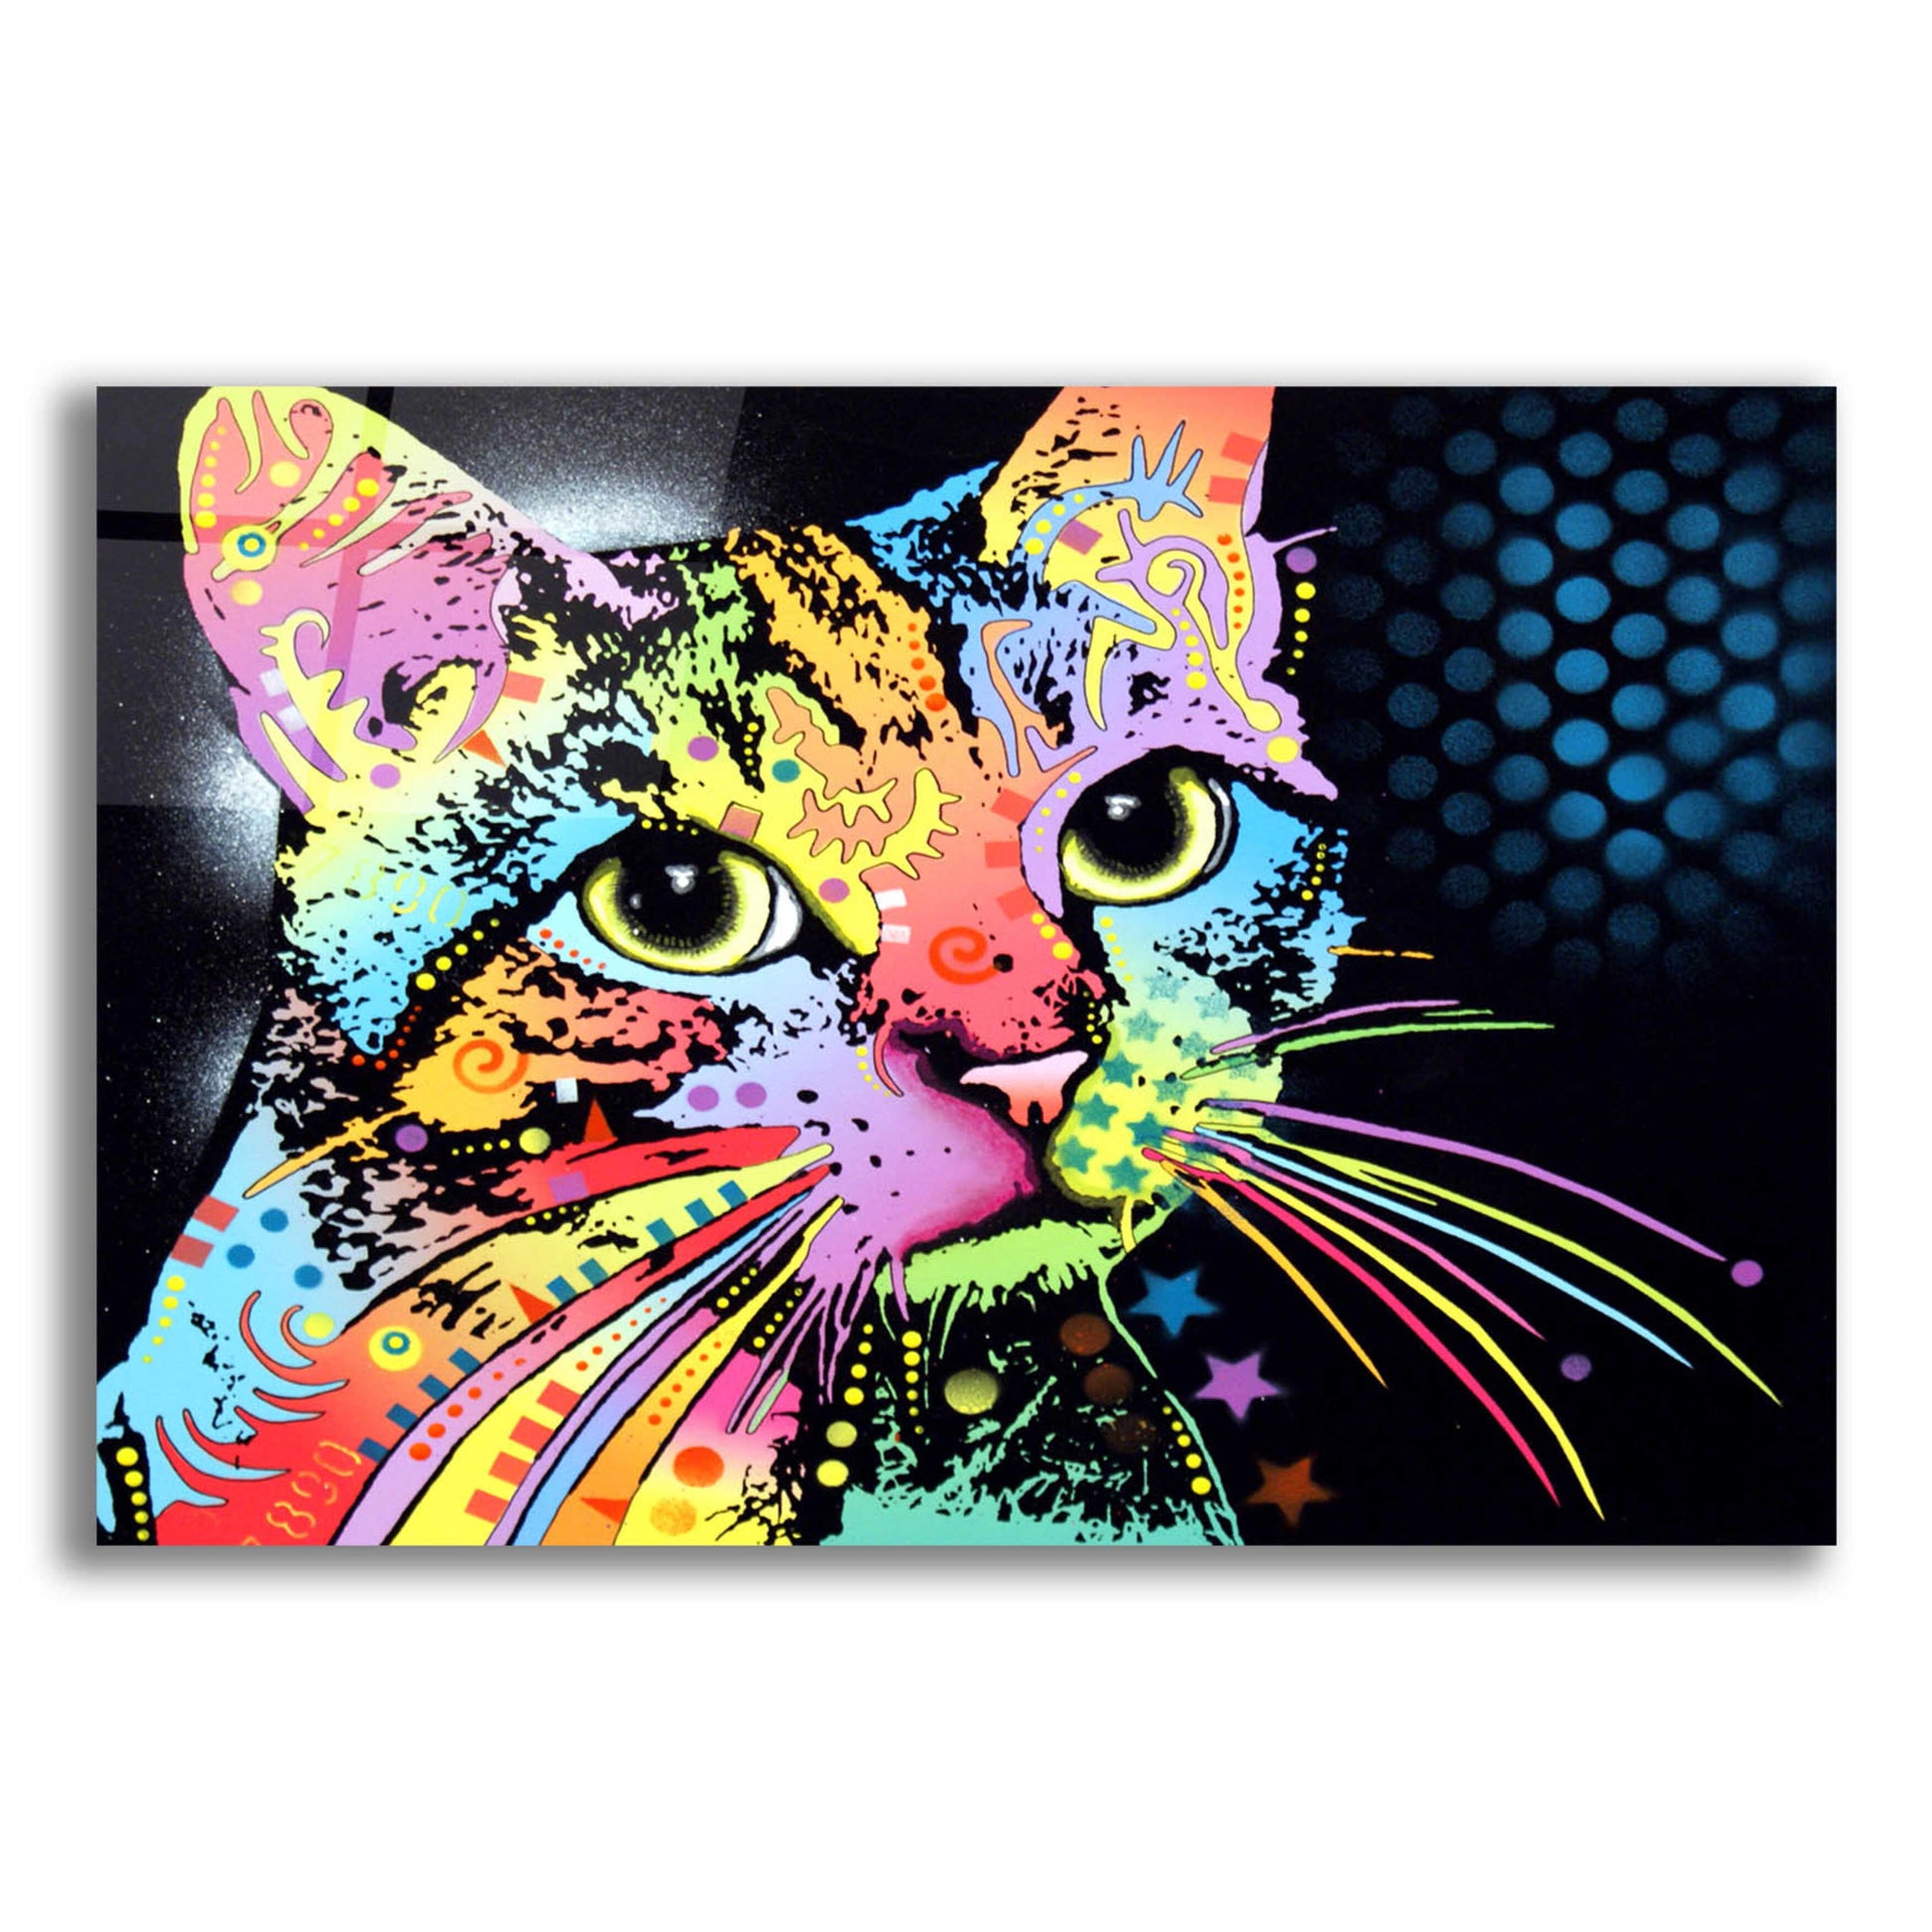 Epic Art 'Catillac New' by Dean Russo, Acrylic Glass Wall Art,24x16